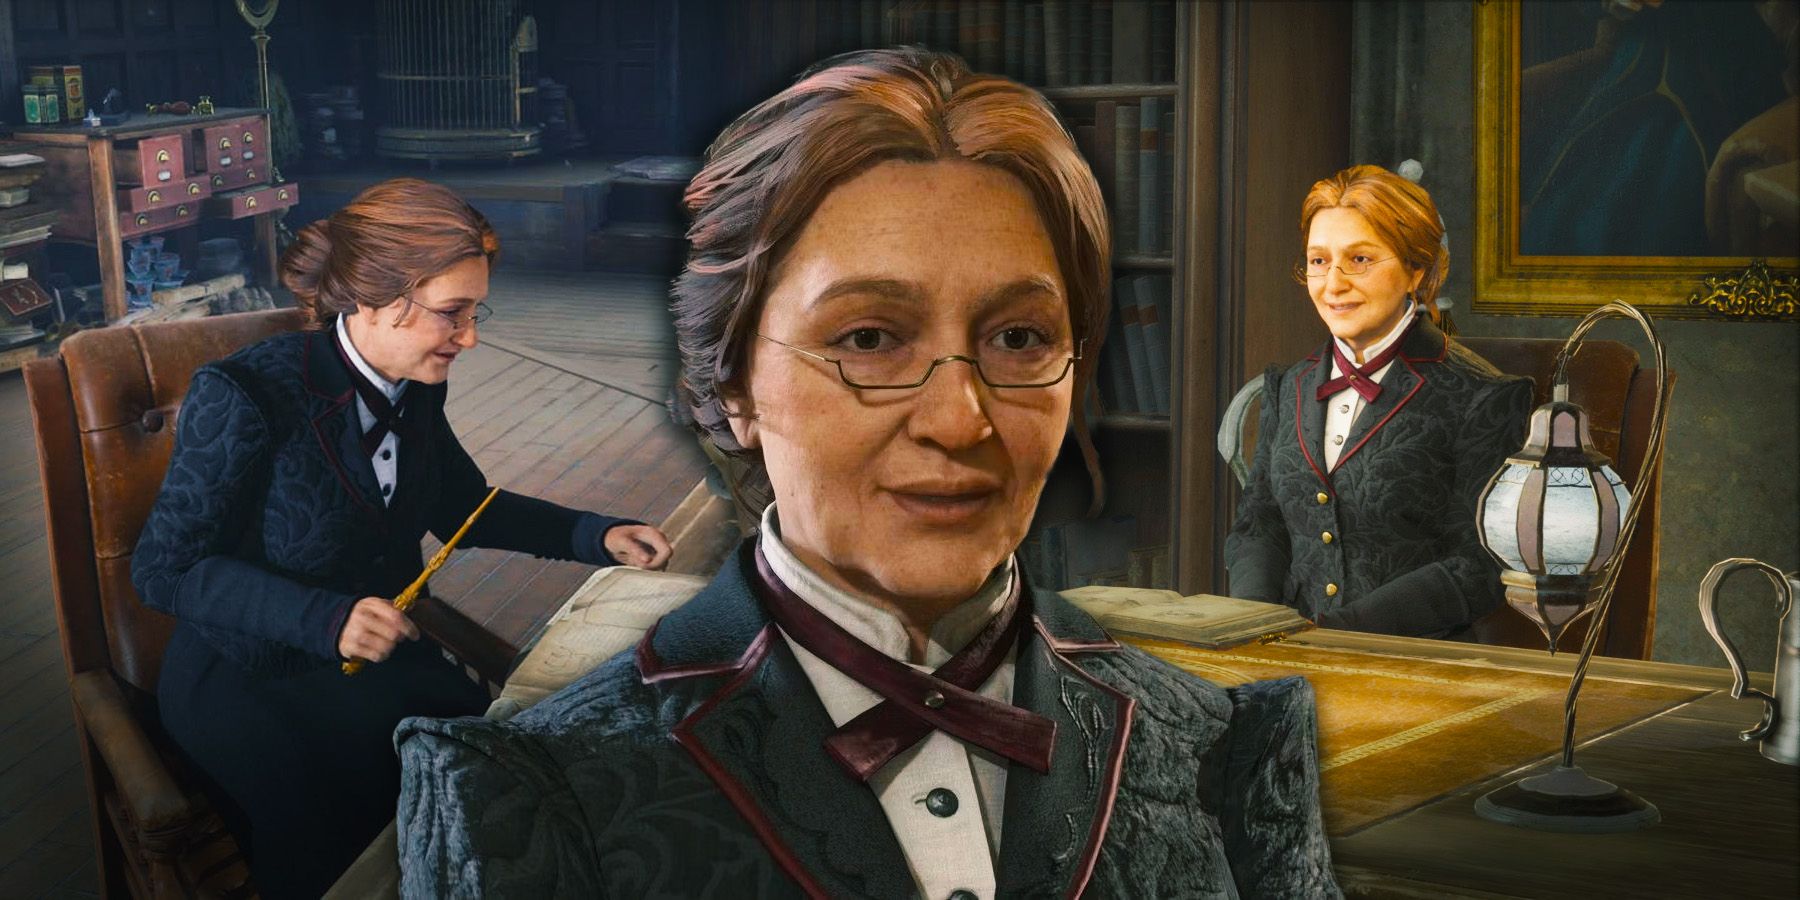 Professor Weasley from Hogwarts Legacy with shots of her sitting at her desk in the background.